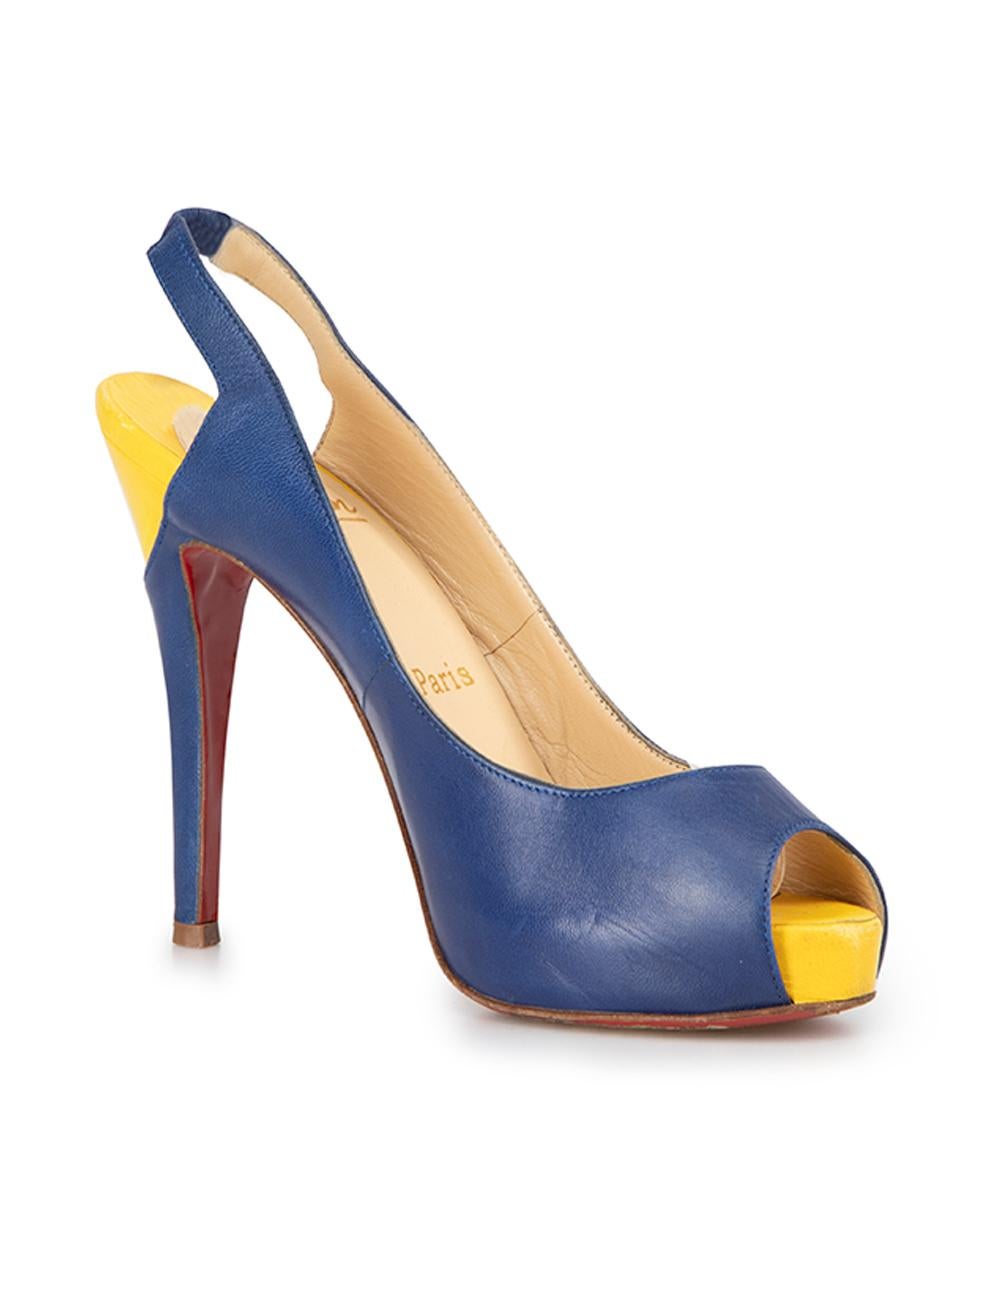 CONDITION is Good. General wear to shoes is evident. Moderate signs of wear to both heels and toe platforms with scuffing on this used Christian Louboutin designer resale item.



Details


Blue

Leather

Slingback heels

Colour block accent

Peep